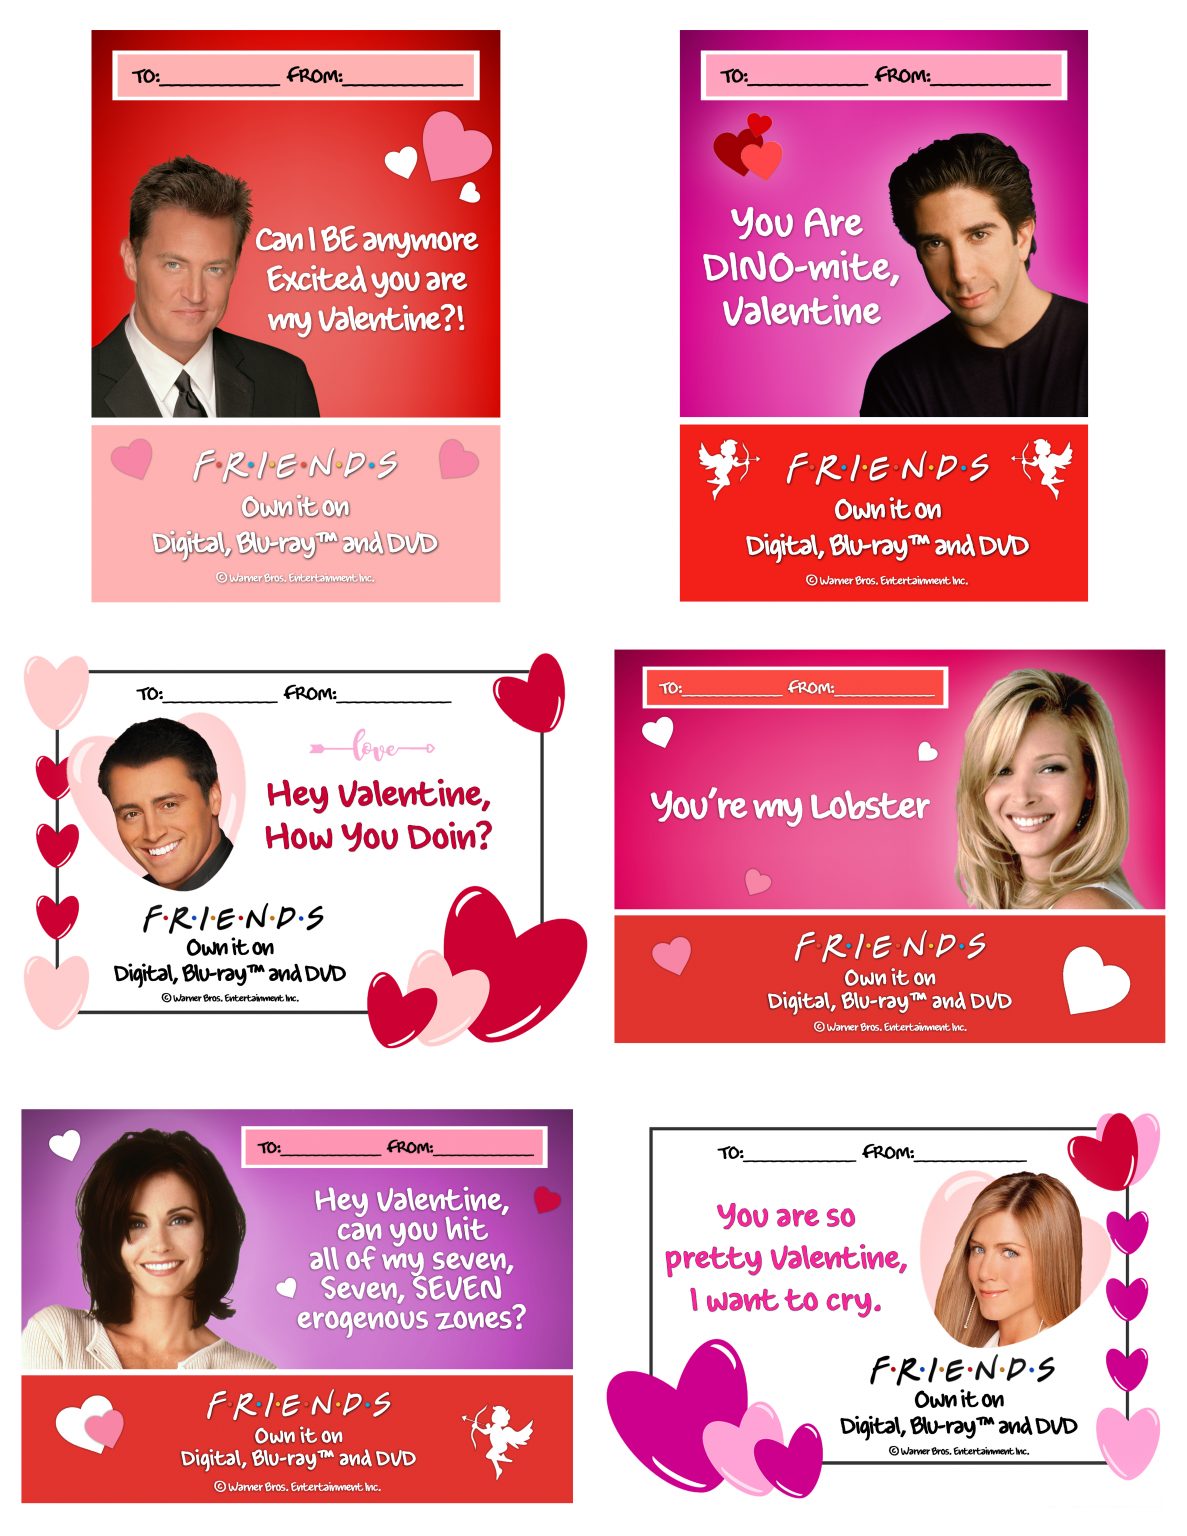 FRIENDS TV SHOW VALENTINES FREE PRINTABLE